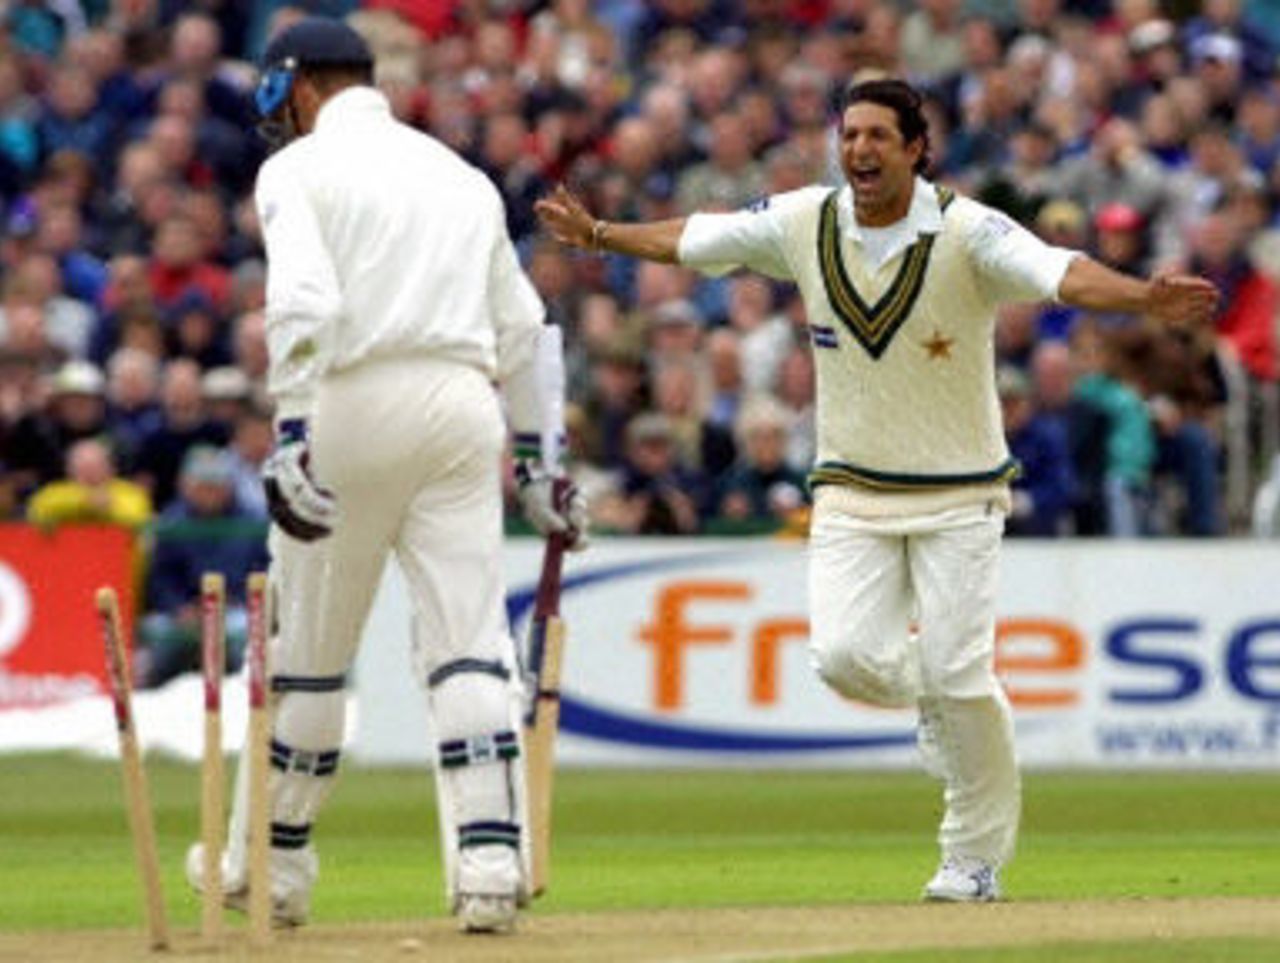 Wasim Akram celebrates the dismissal of Trescothick, day 2, 2nd Test at Old Trafford, 17-21 May 2001.